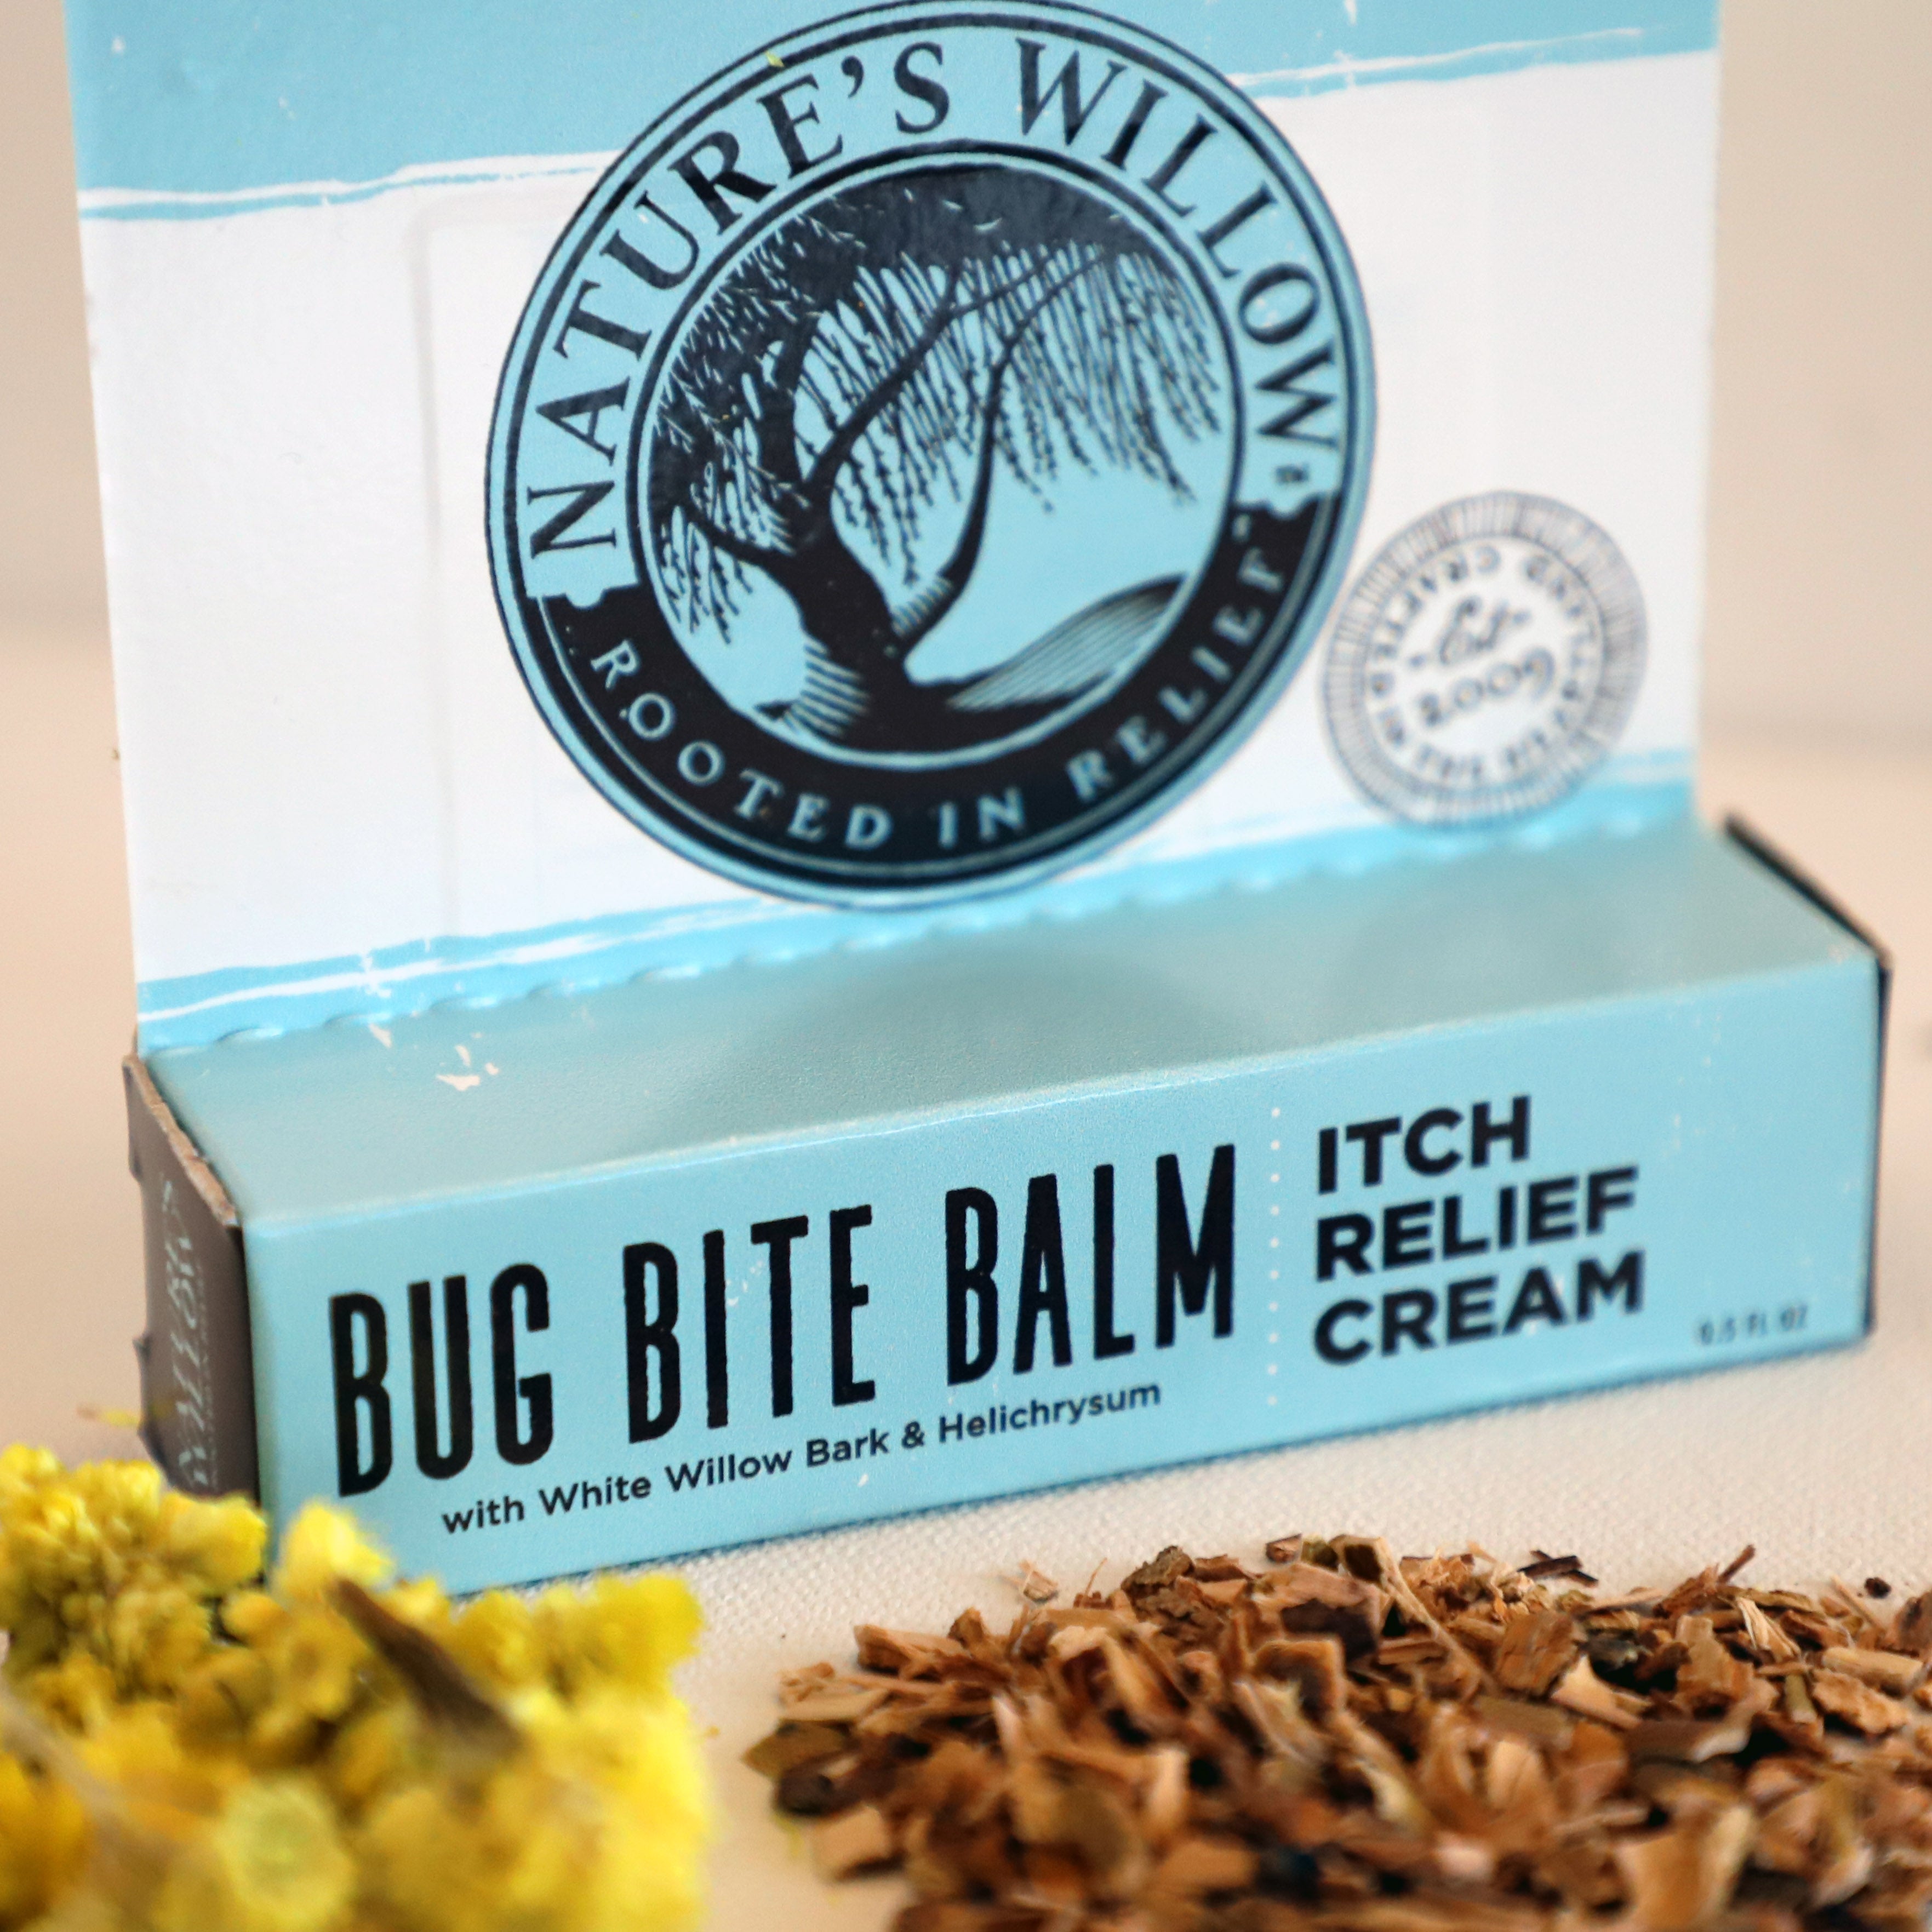 Introducing Our NEW Bug Bite Balm